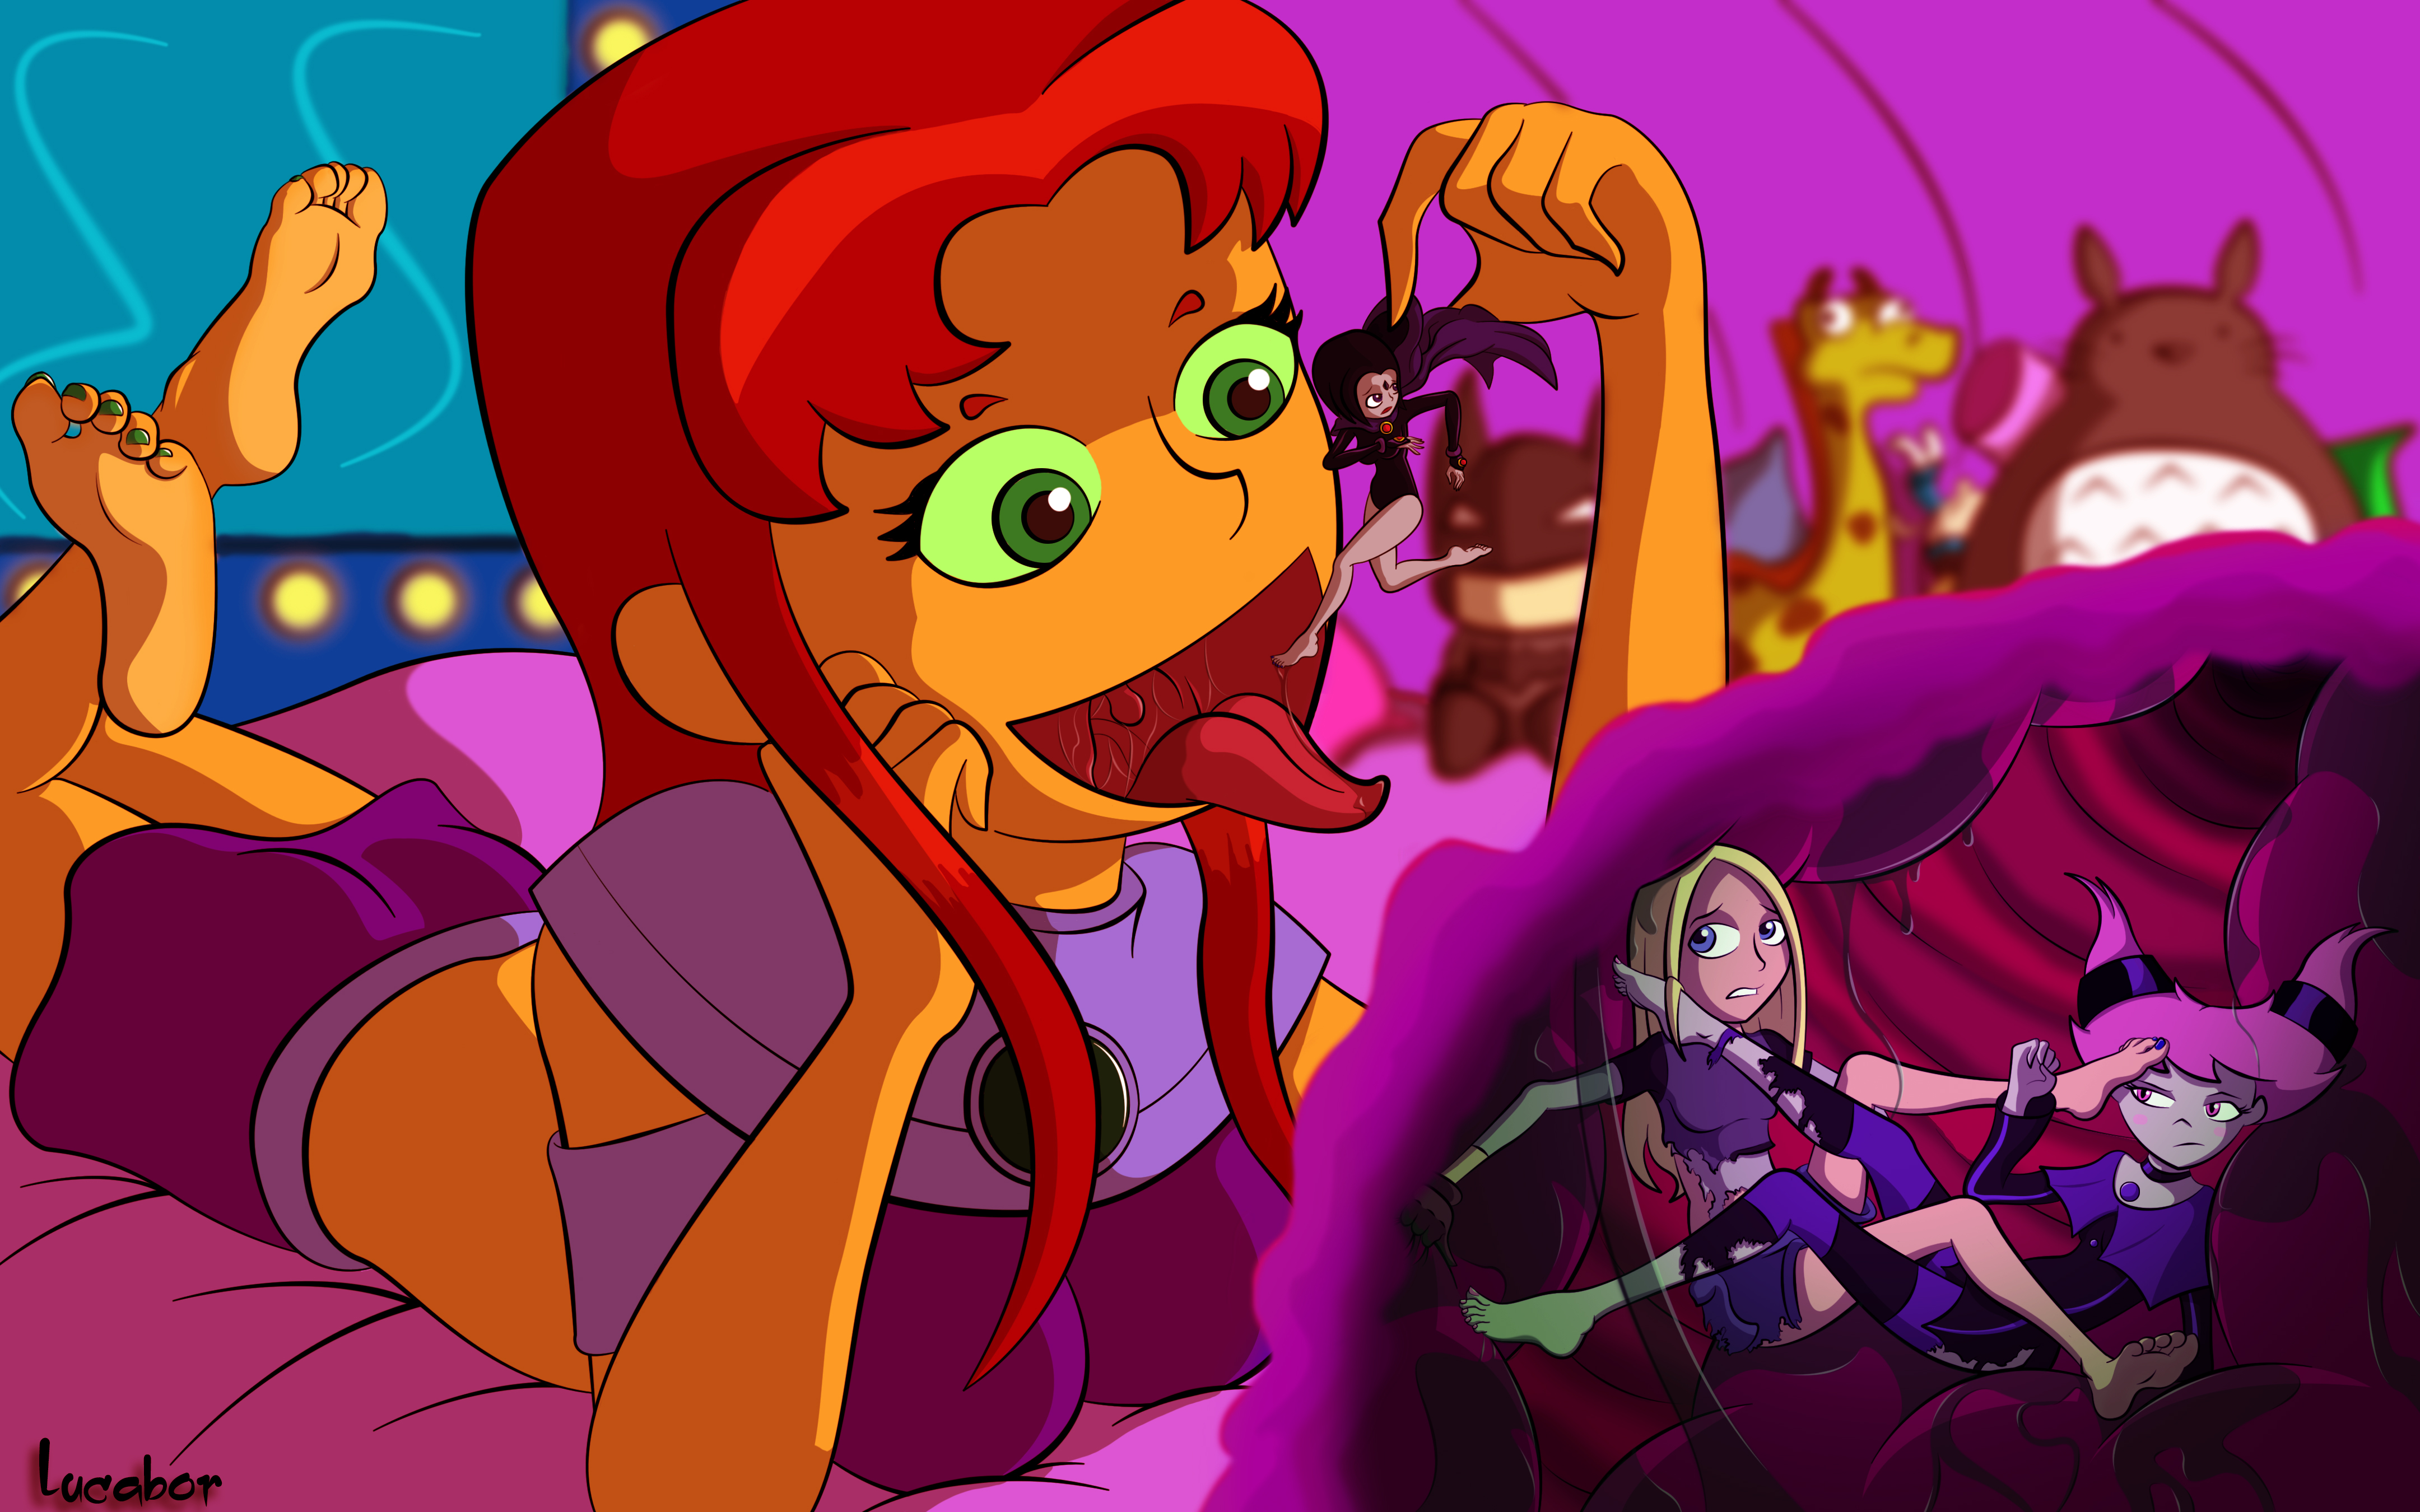 Starfire's Snack by Lucabor on DeviantArt